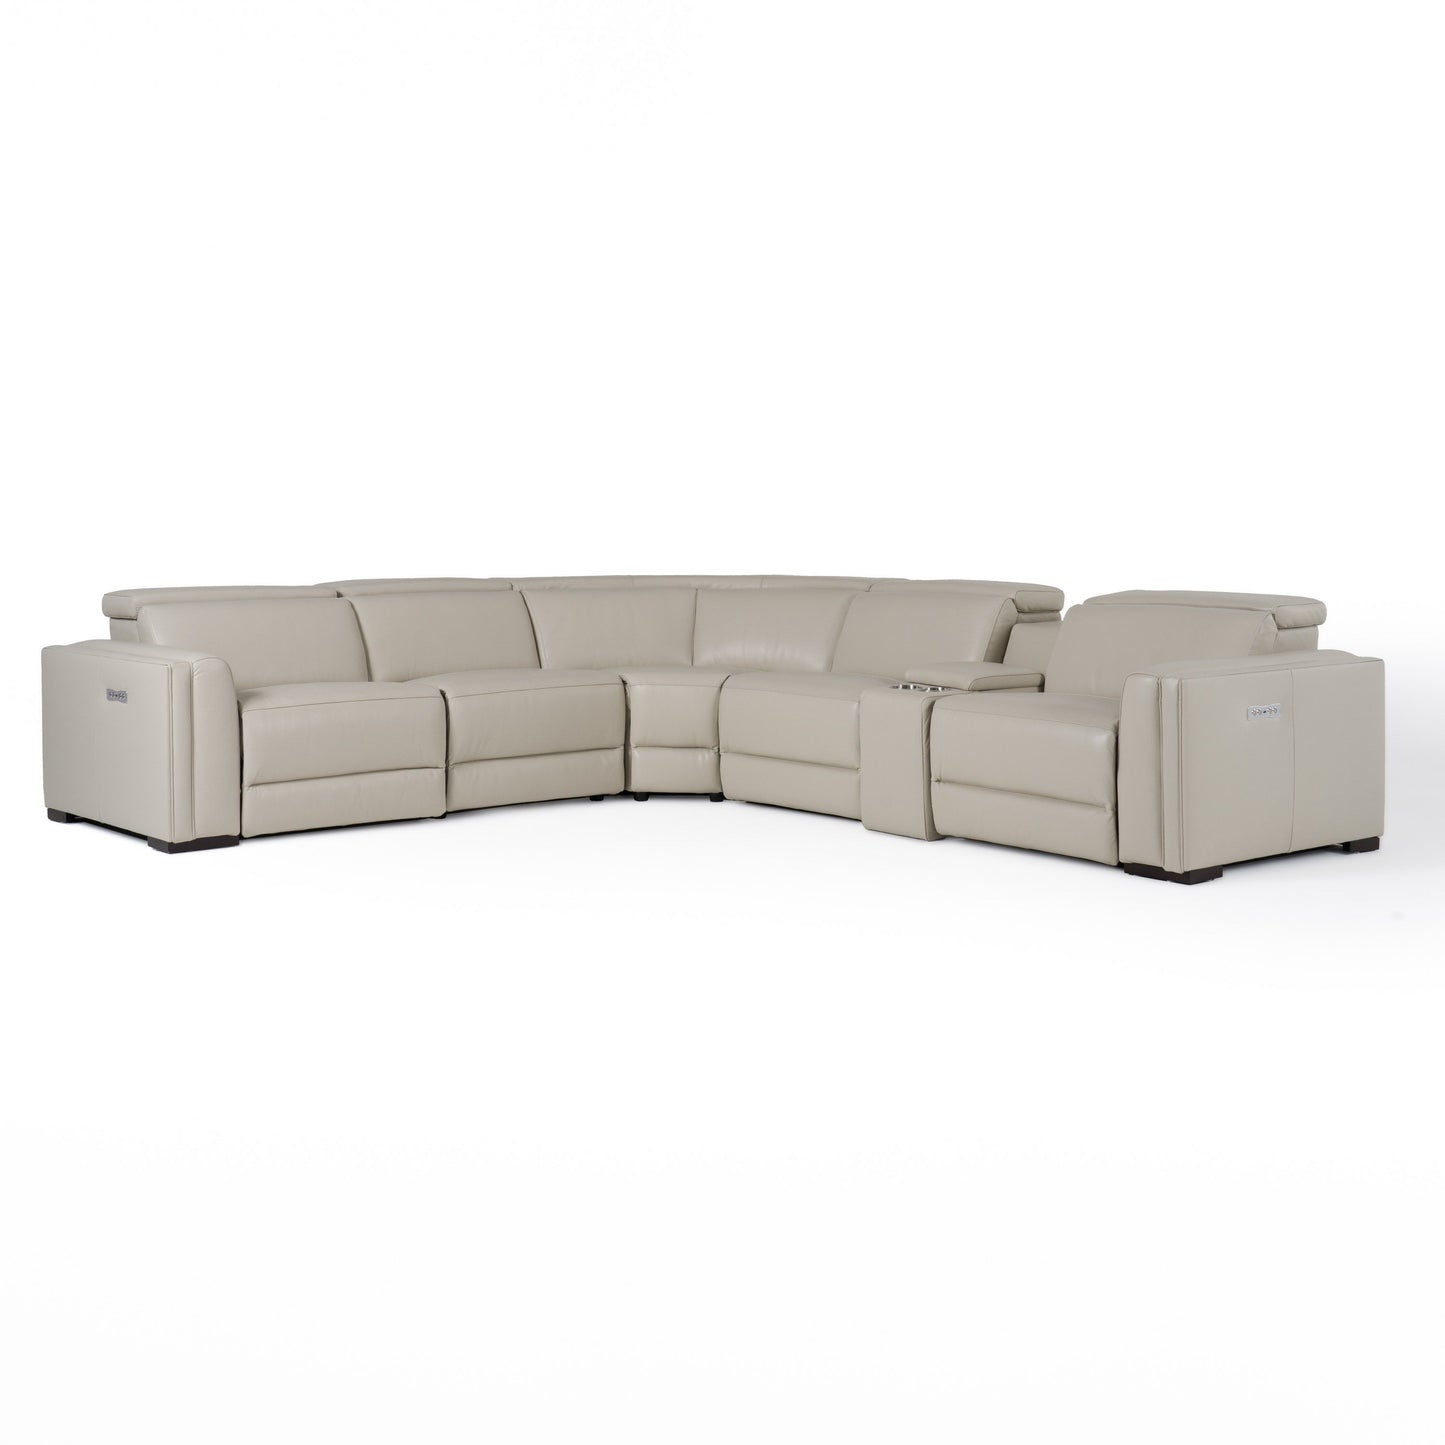 Modrest Frazier - Modern Light Grey Leather Sectional Sofa with 3 Recliners + Console